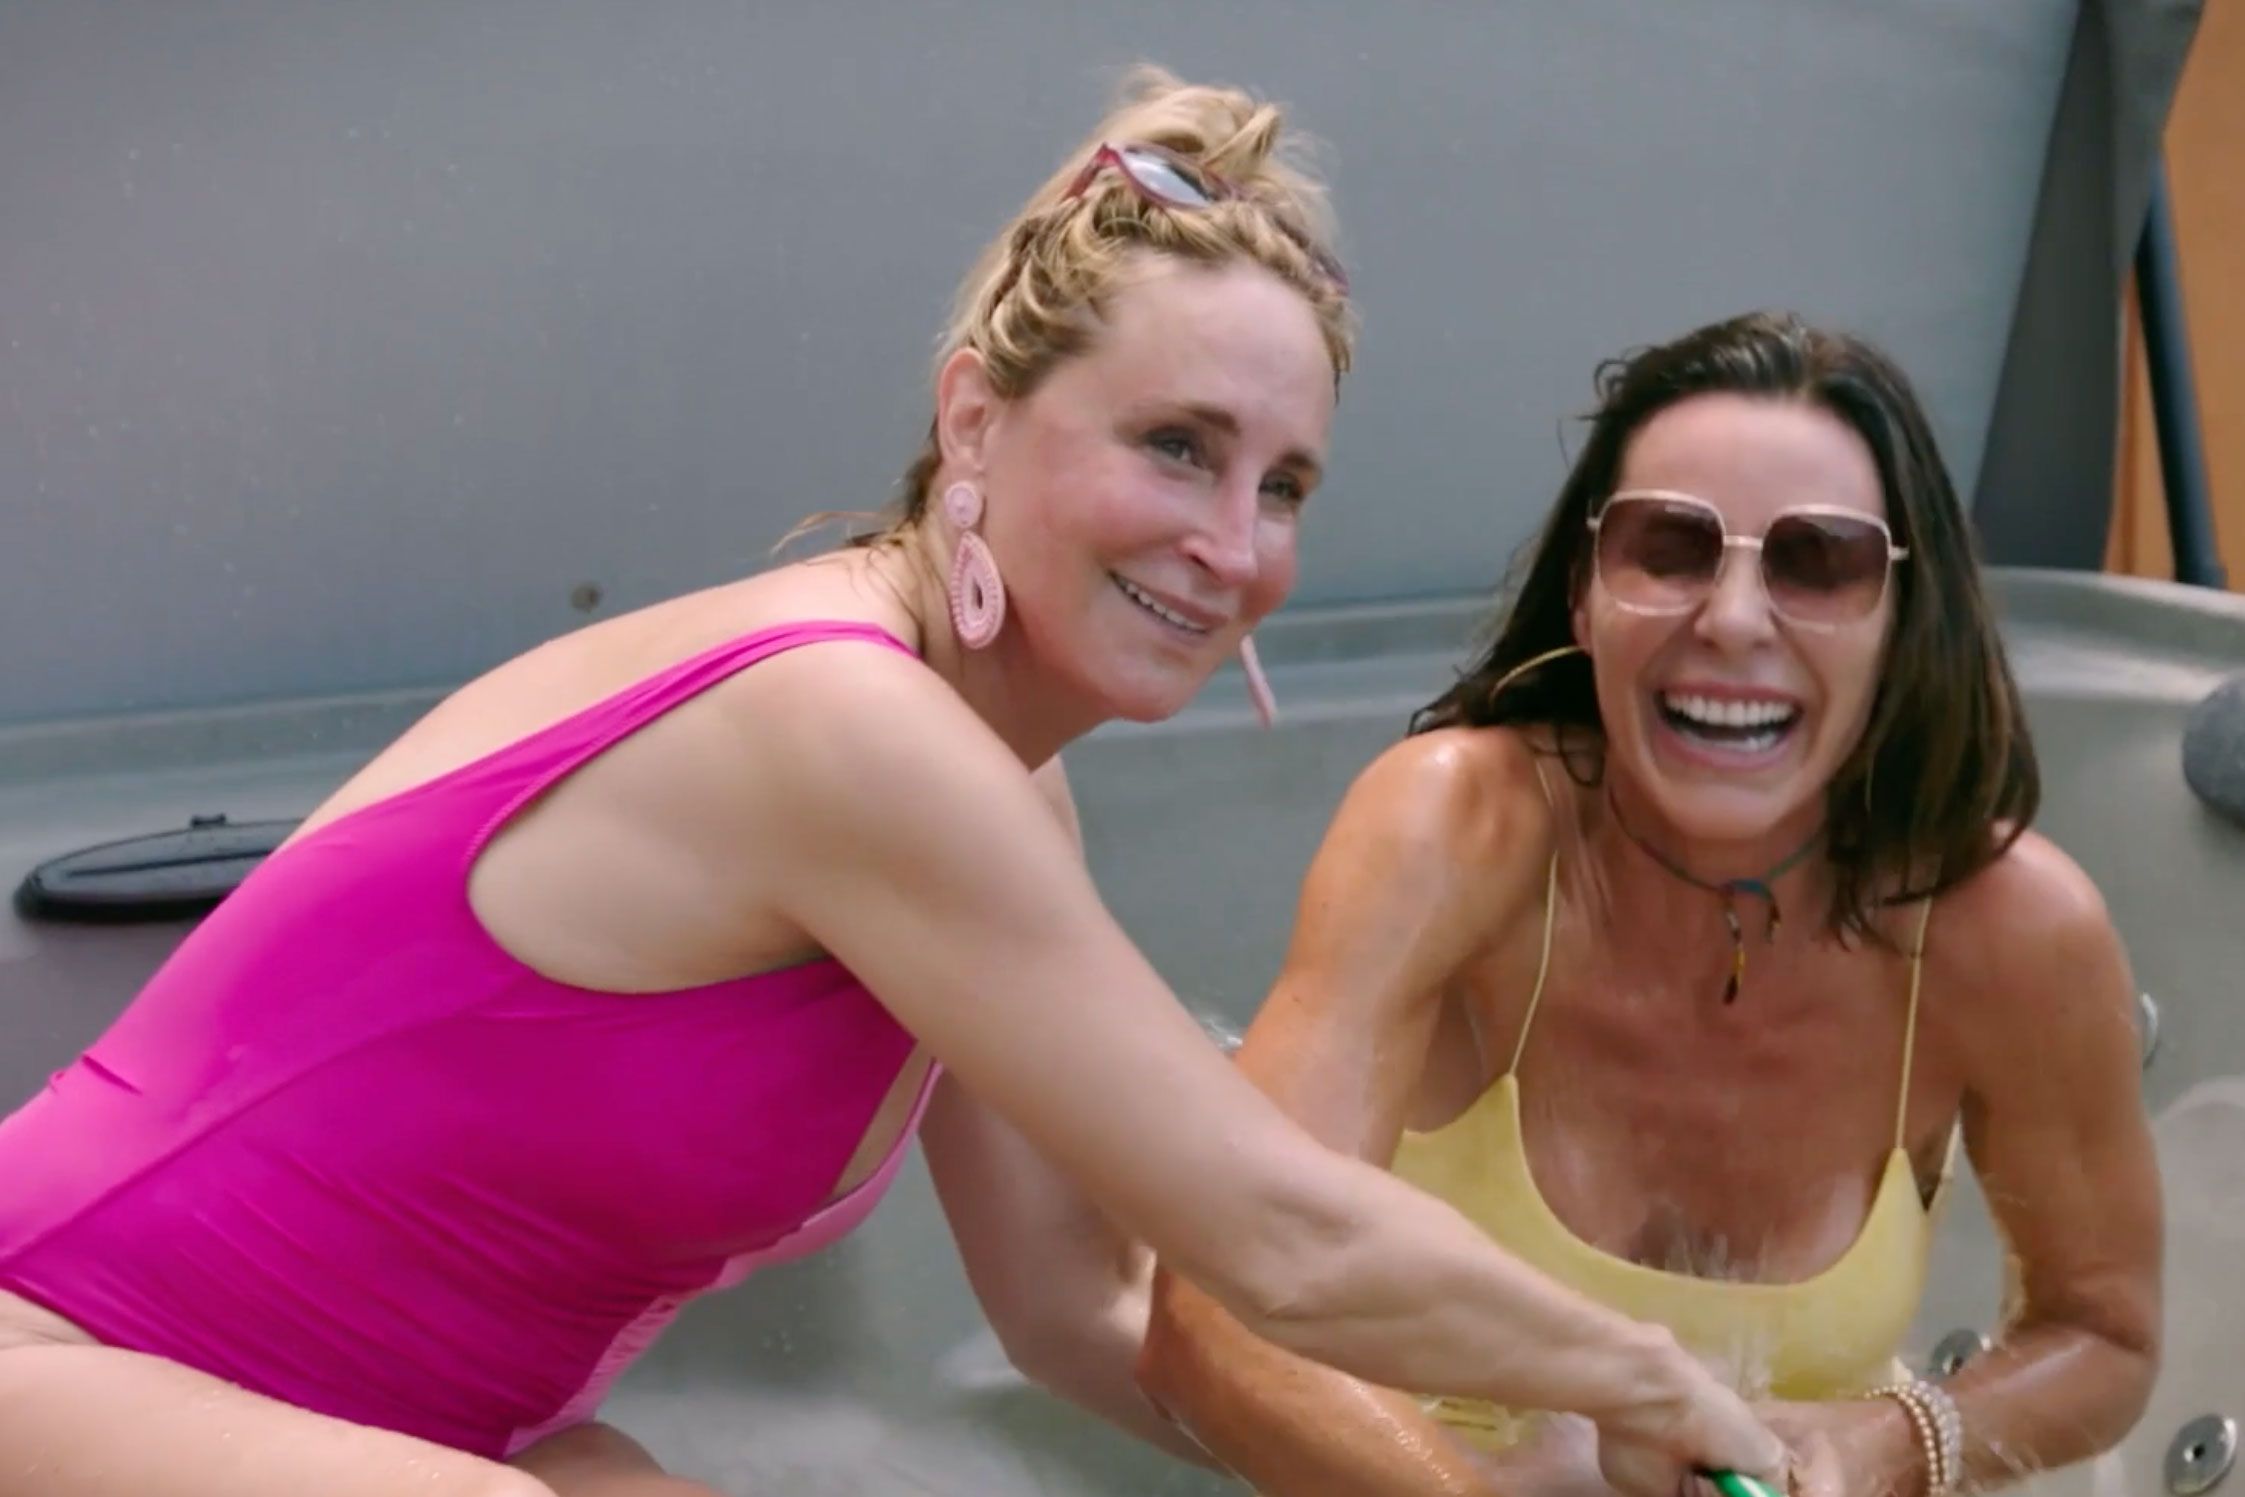 Luann and Sonja Welcome to Crappie Lake Recap, Episode 6